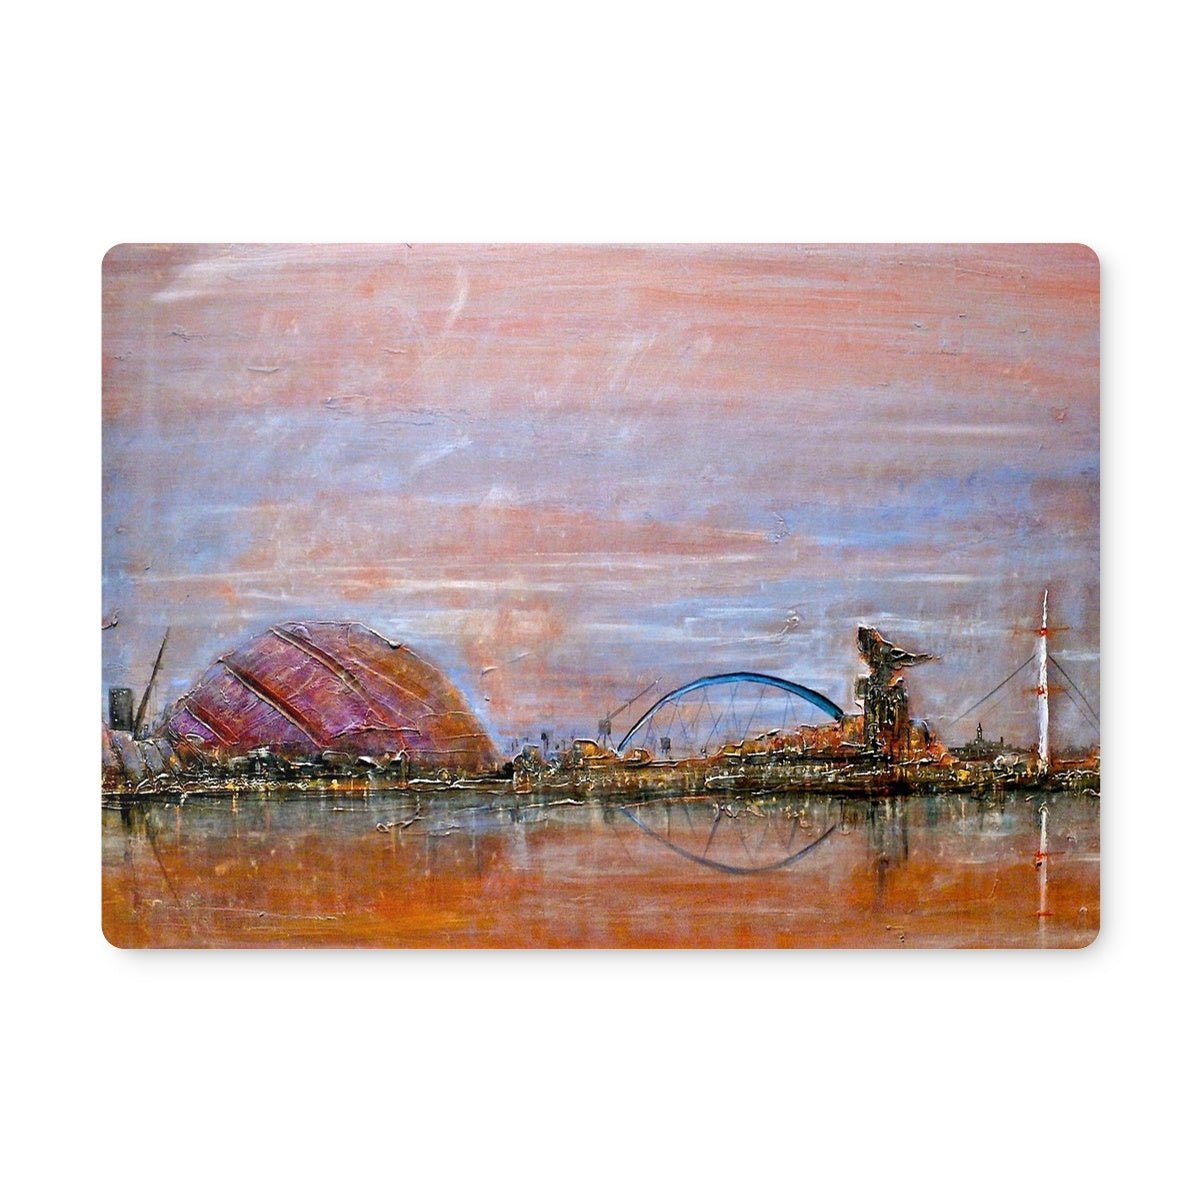 Glasgow Harbour Art Gifts Placemat-Placemats-Edinburgh & Glasgow Art Gallery-Single Placemat-Paintings, Prints, Homeware, Art Gifts From Scotland By Scottish Artist Kevin Hunter